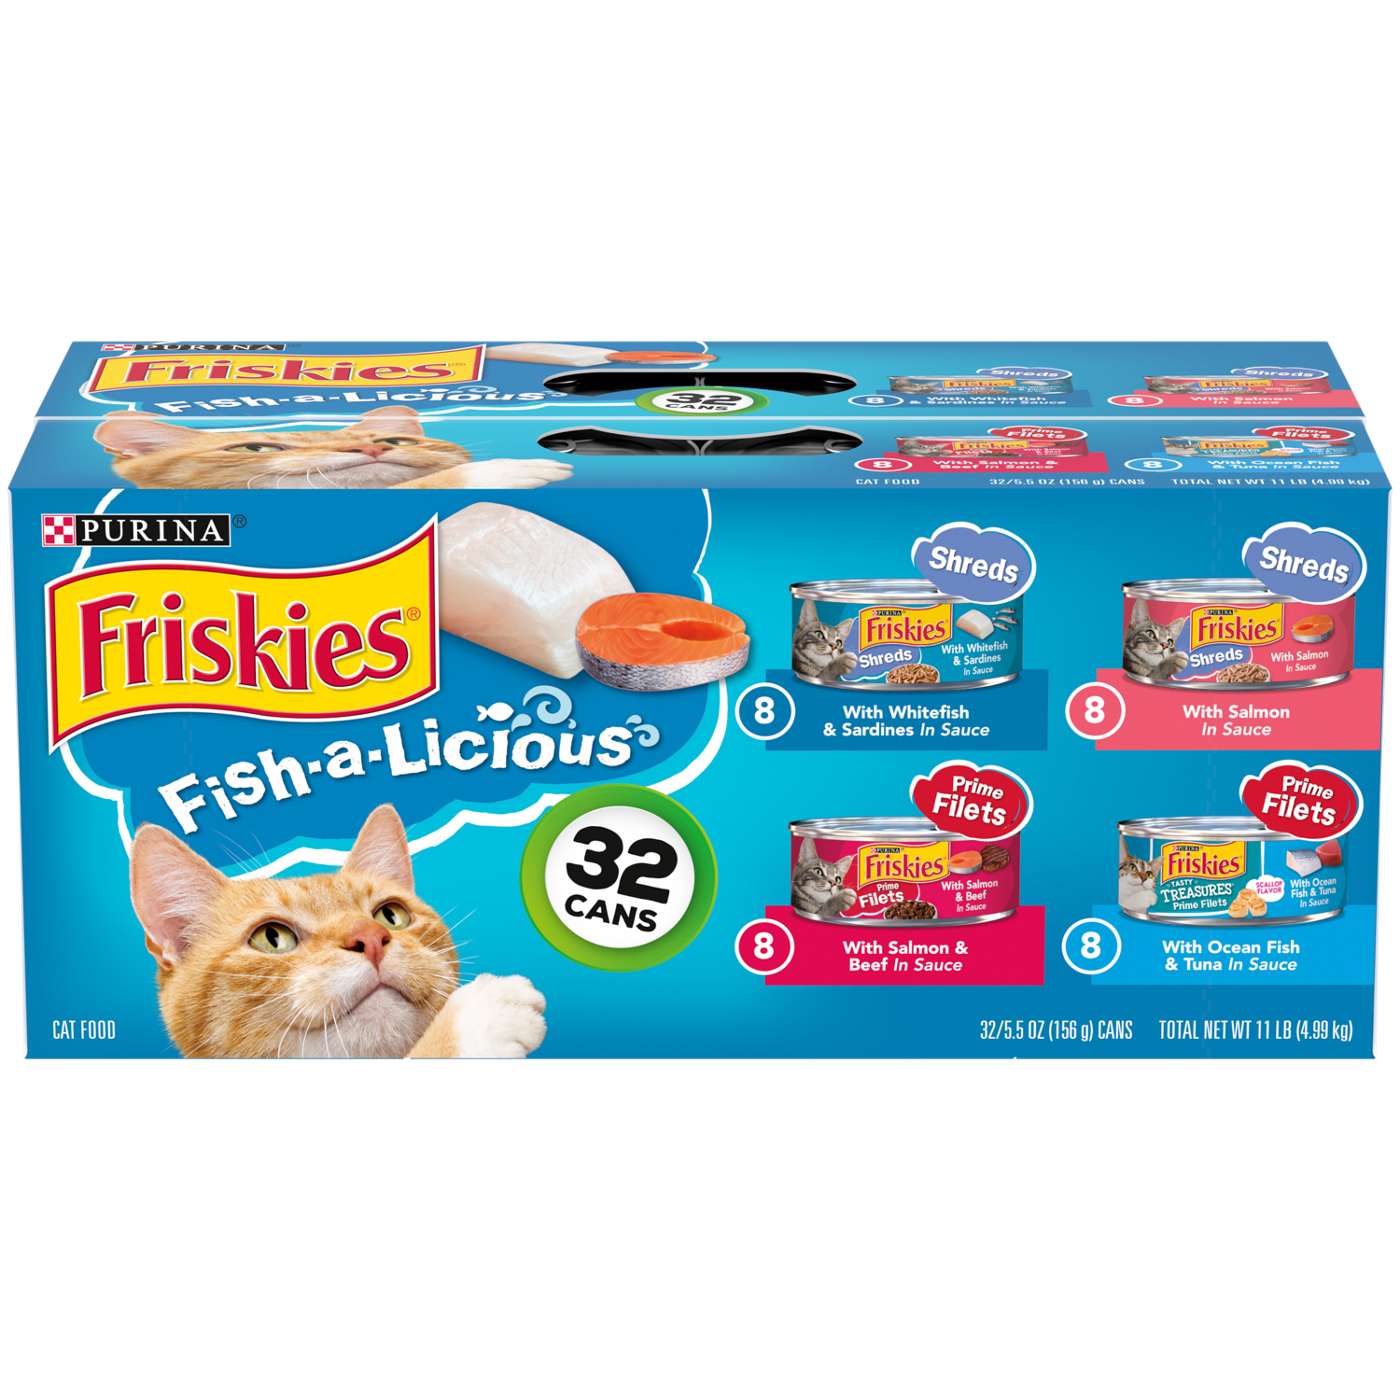 Friskies Wet Cat Food Variety Pack, Fish-A-Lucious; image 1 of 5